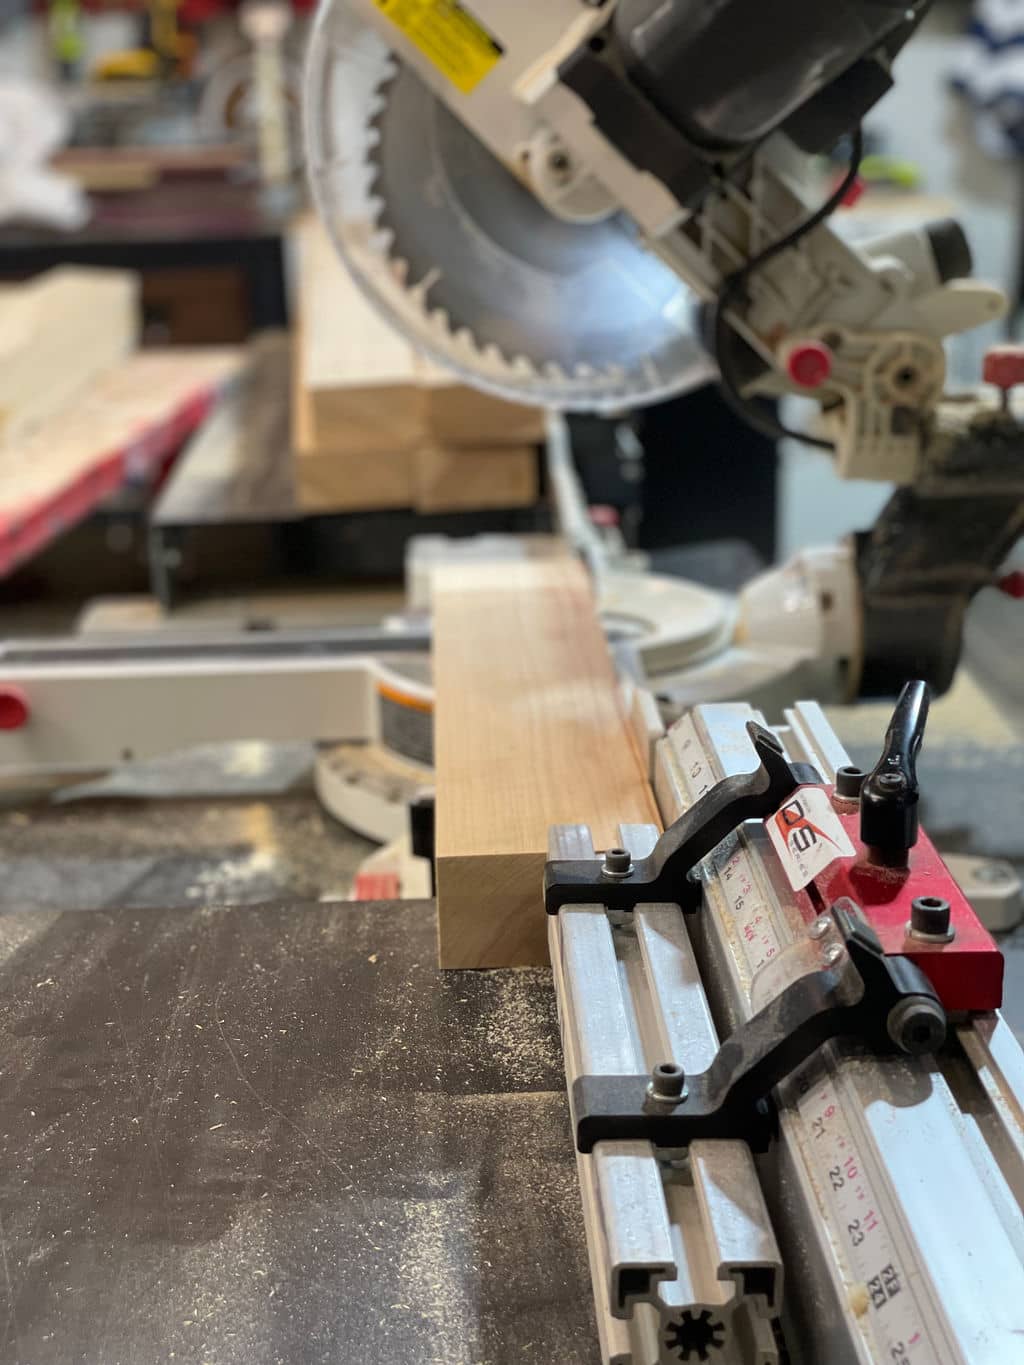 Meaure accurately with the hlpe of a Wood Cutting Station. Miter saw is cutting wood while being measured with a Saw Measuring System.